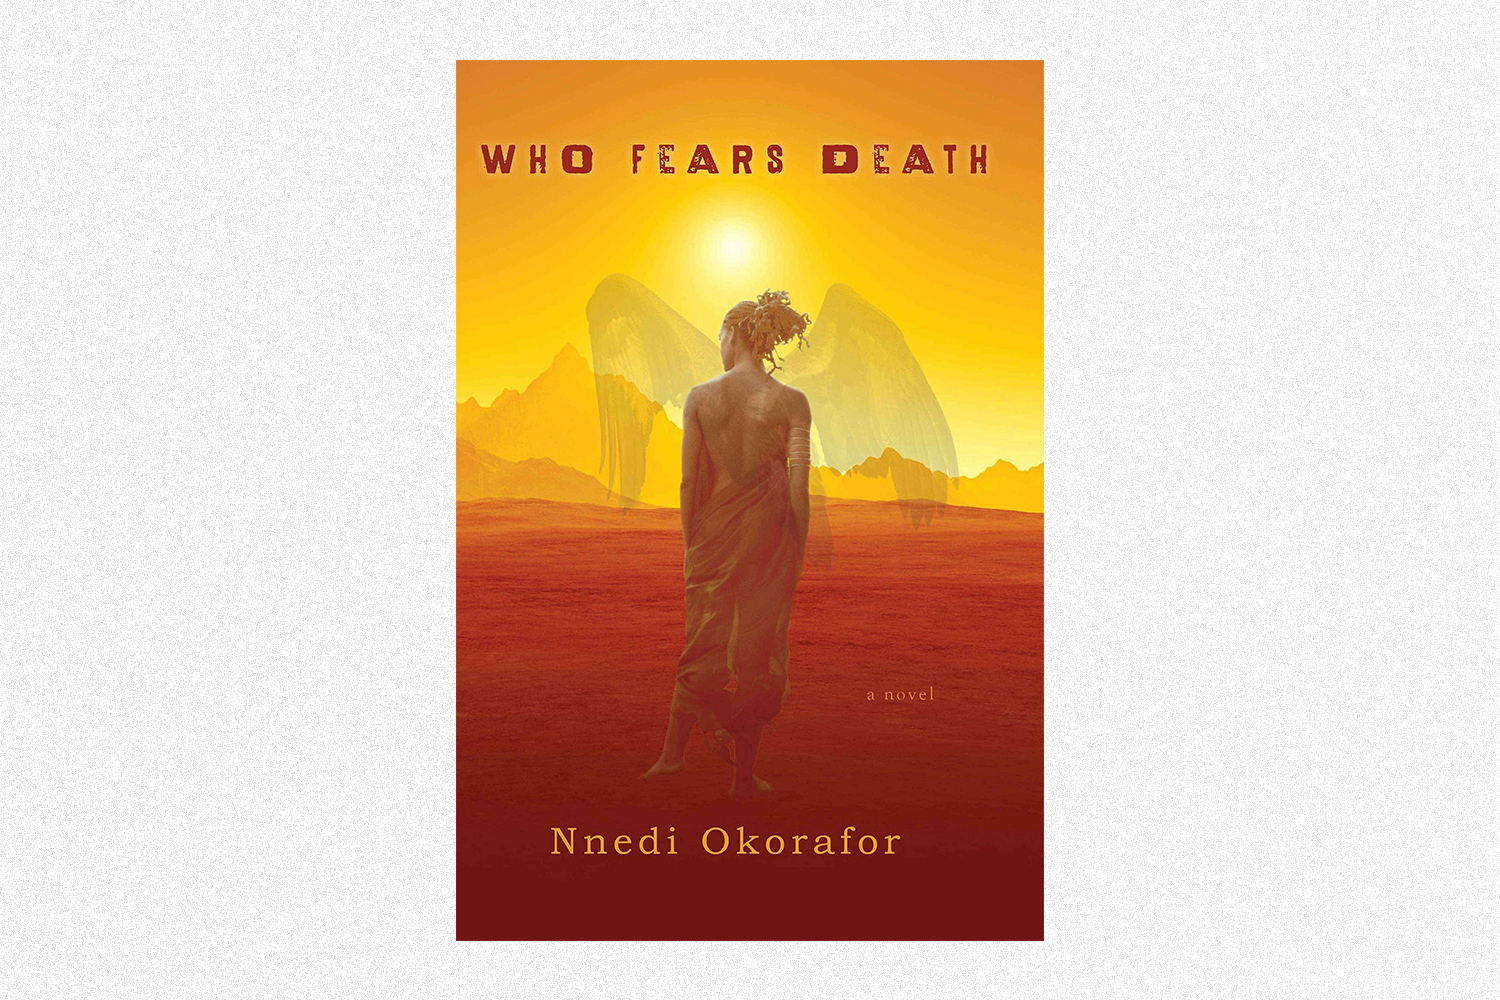 The book cover for Who Fears Death by Nnedi Okorafor 